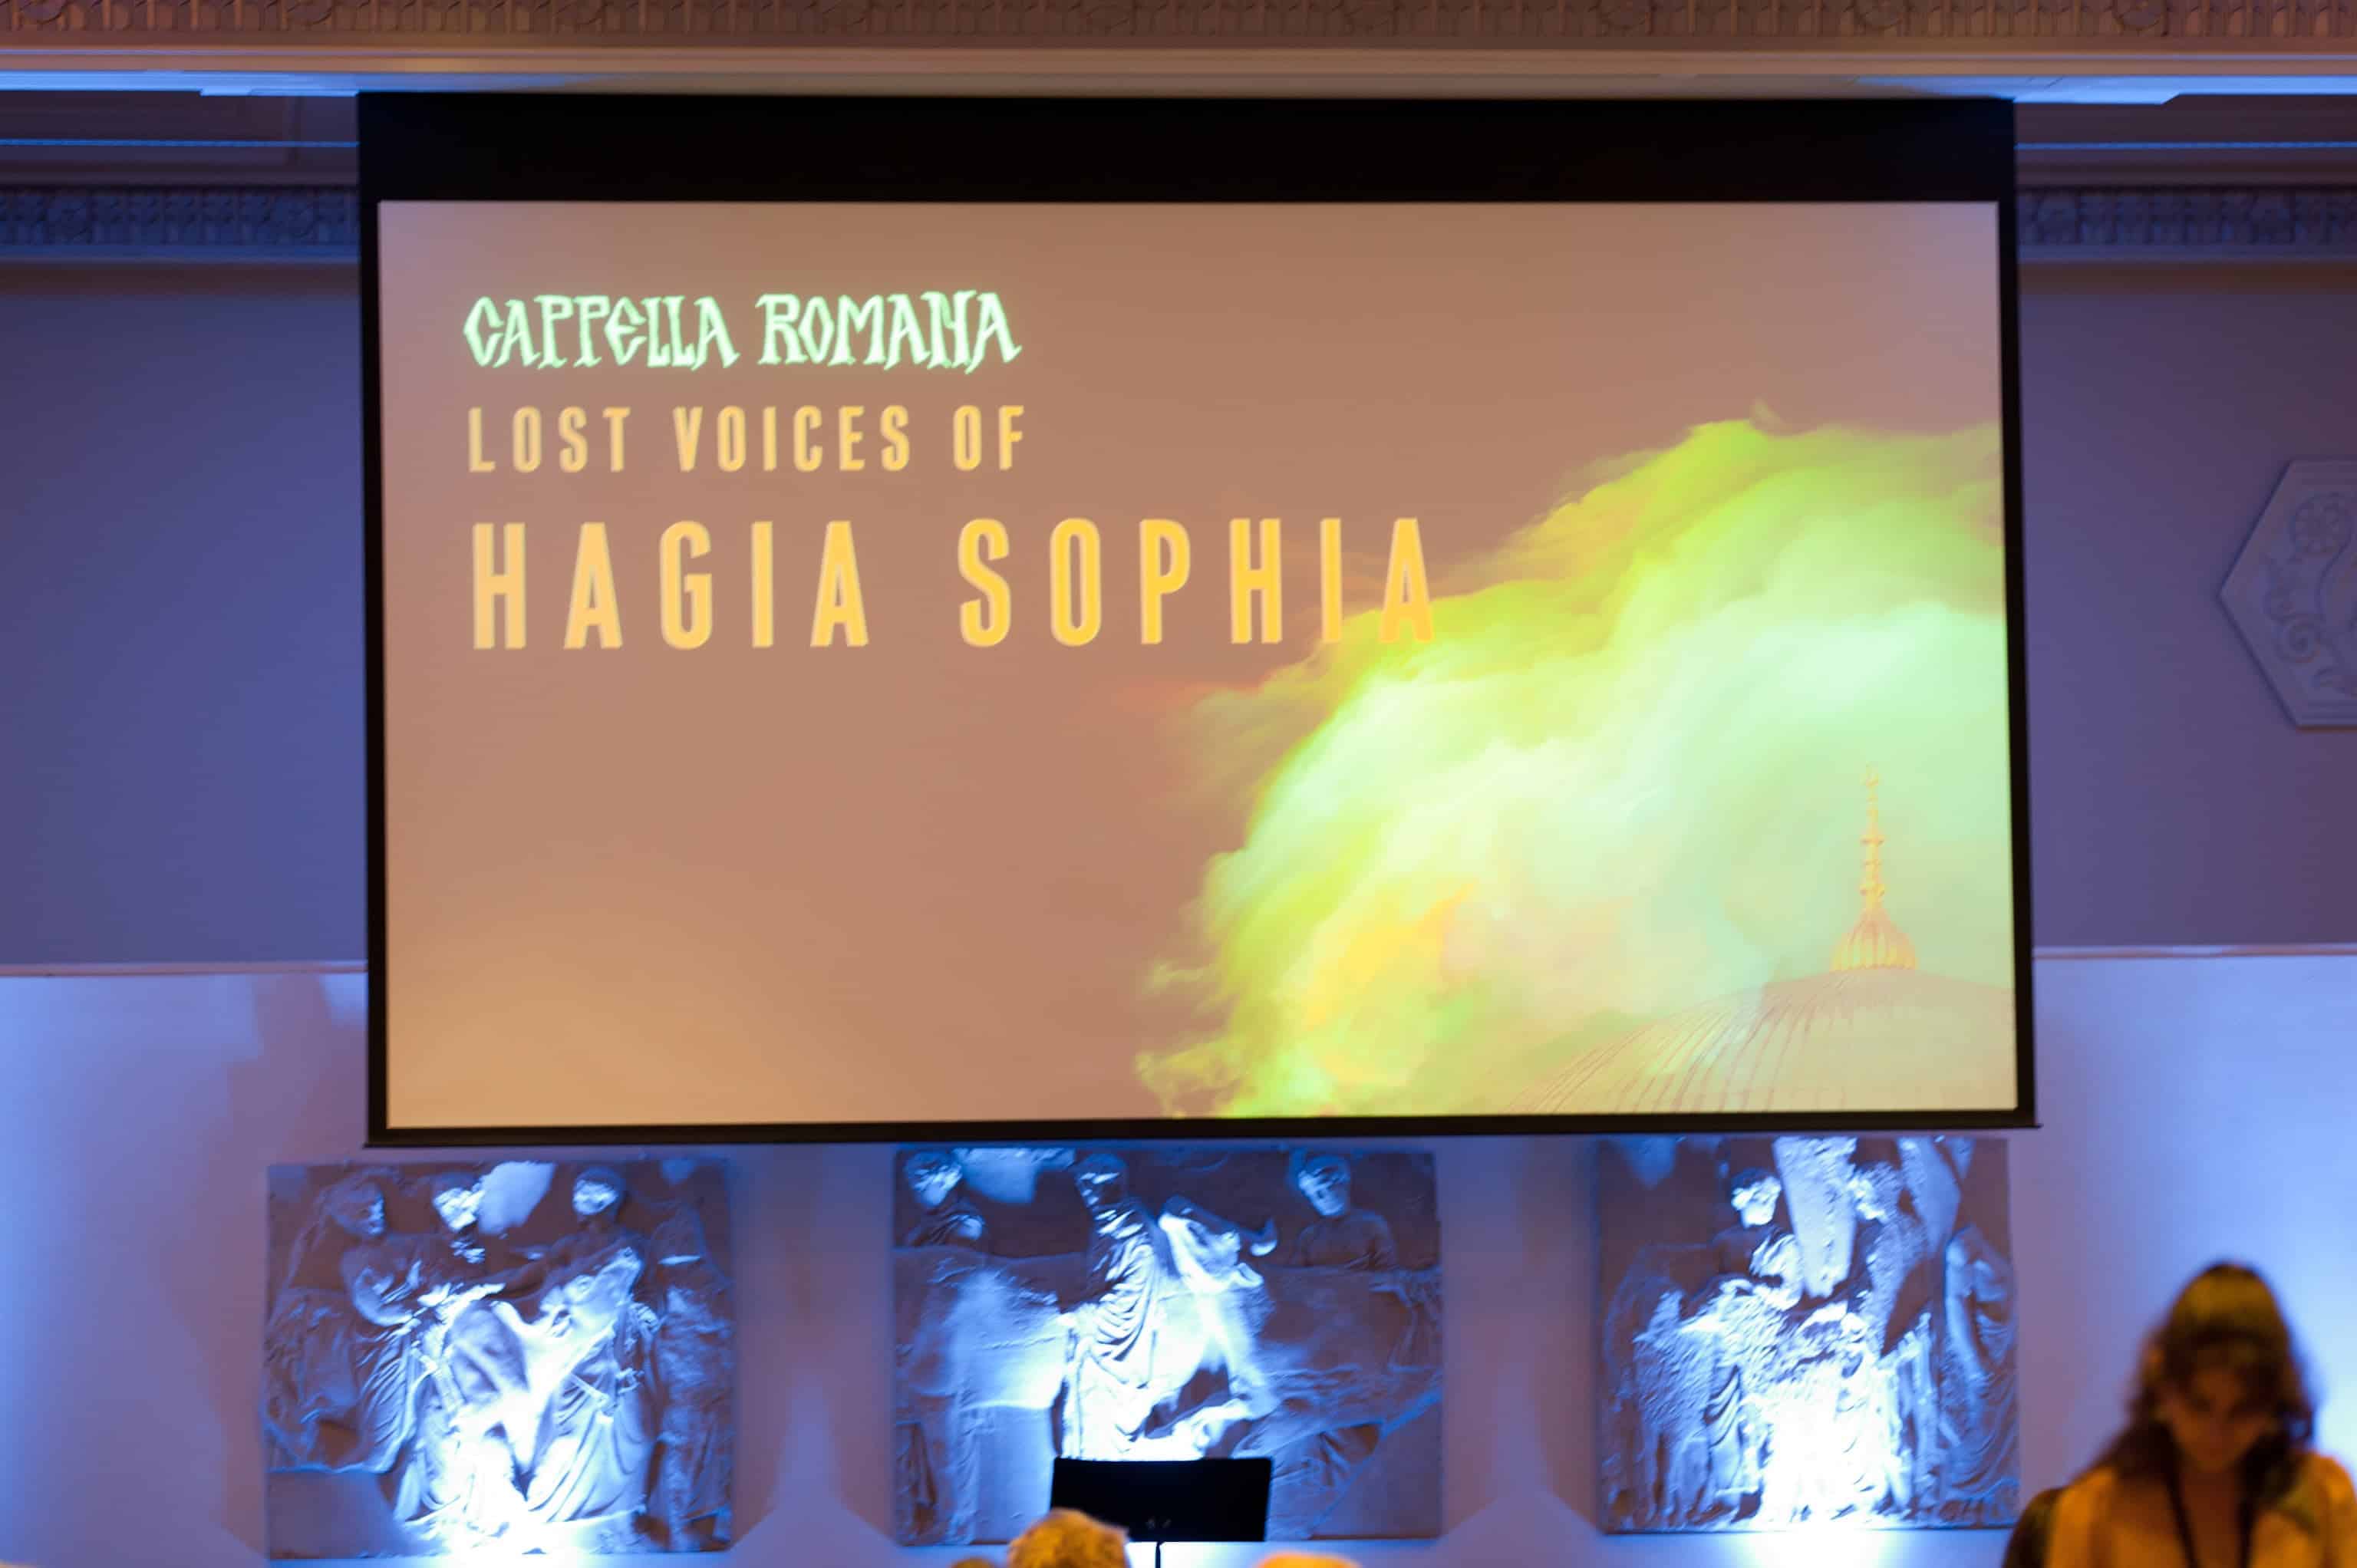 Lost Voices of Hagia Sophia Concert and Gala Photos!